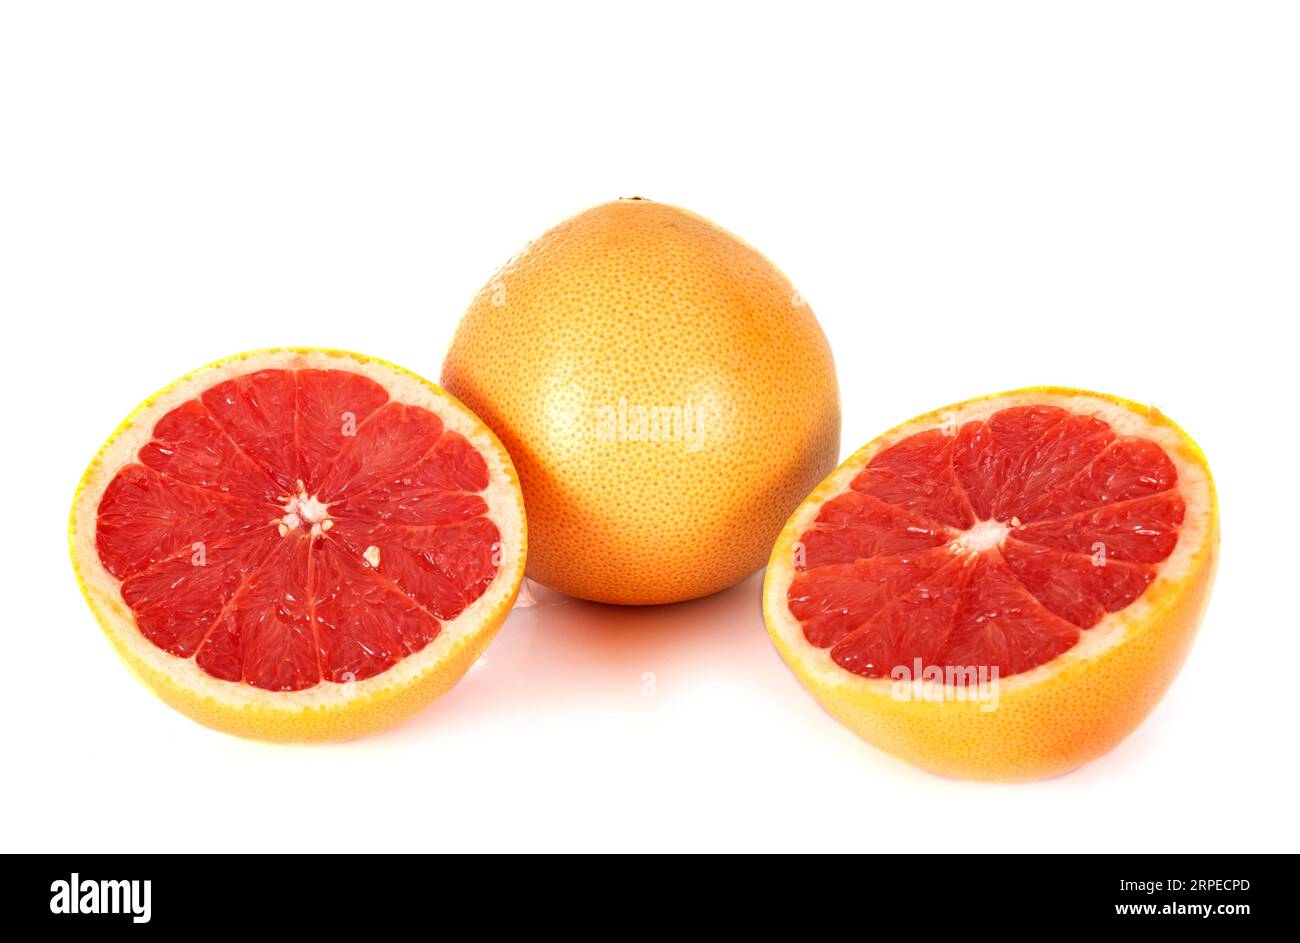 pink grapefruit in front of white background Stock Photo